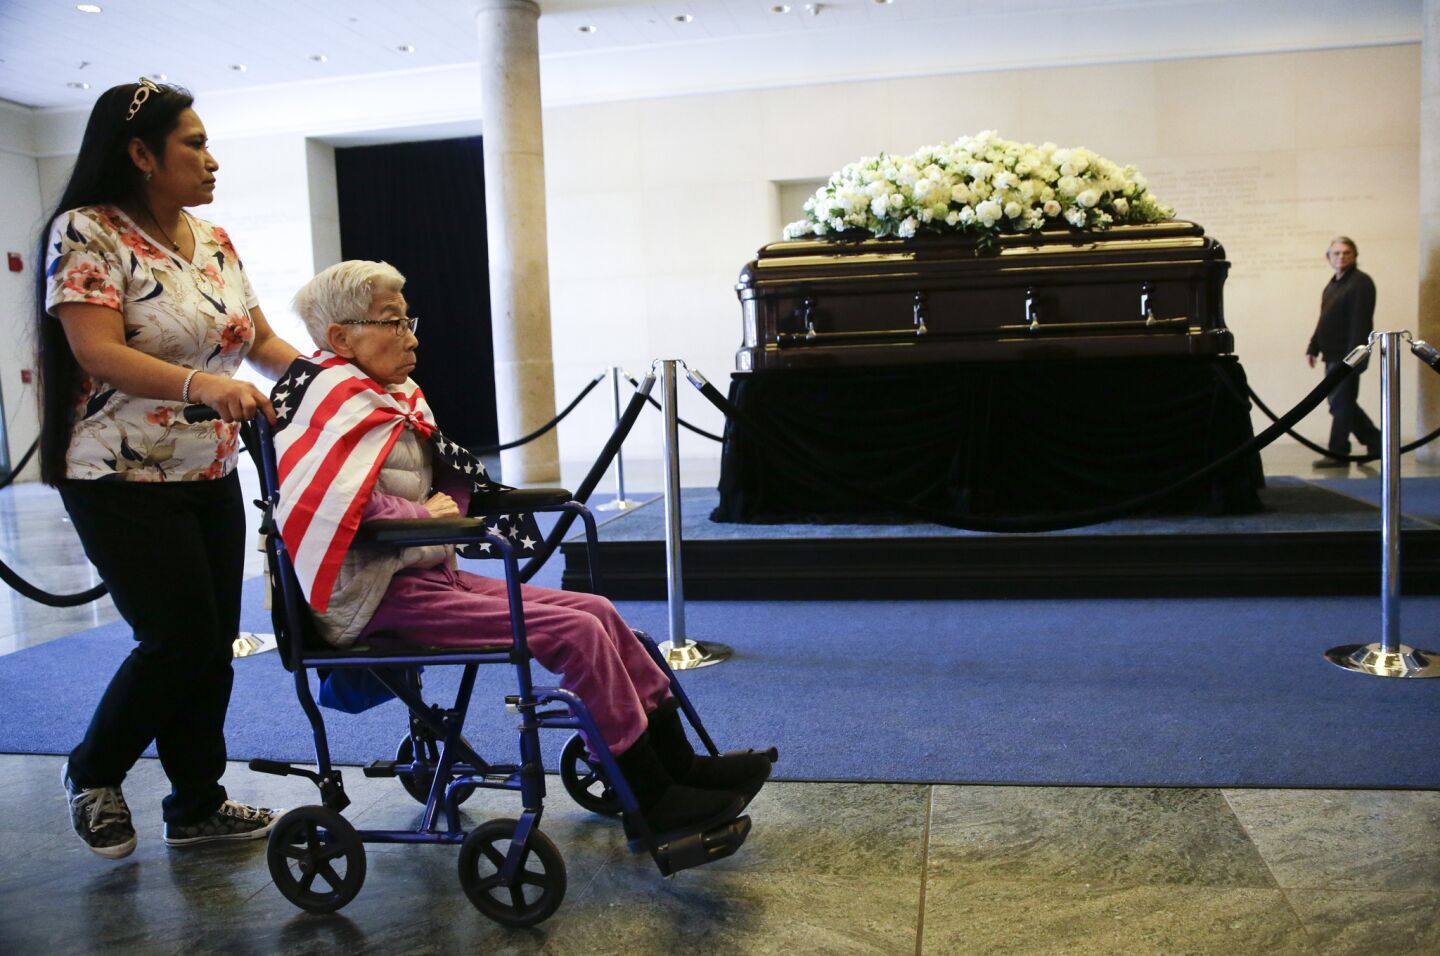 Stella Delgado, left, and her mother Yoko Santos pause as they pay their respects beside the casket of Nancy Reagan at the Ronald Reagan Presidential Library in Simi Valley, Calif.